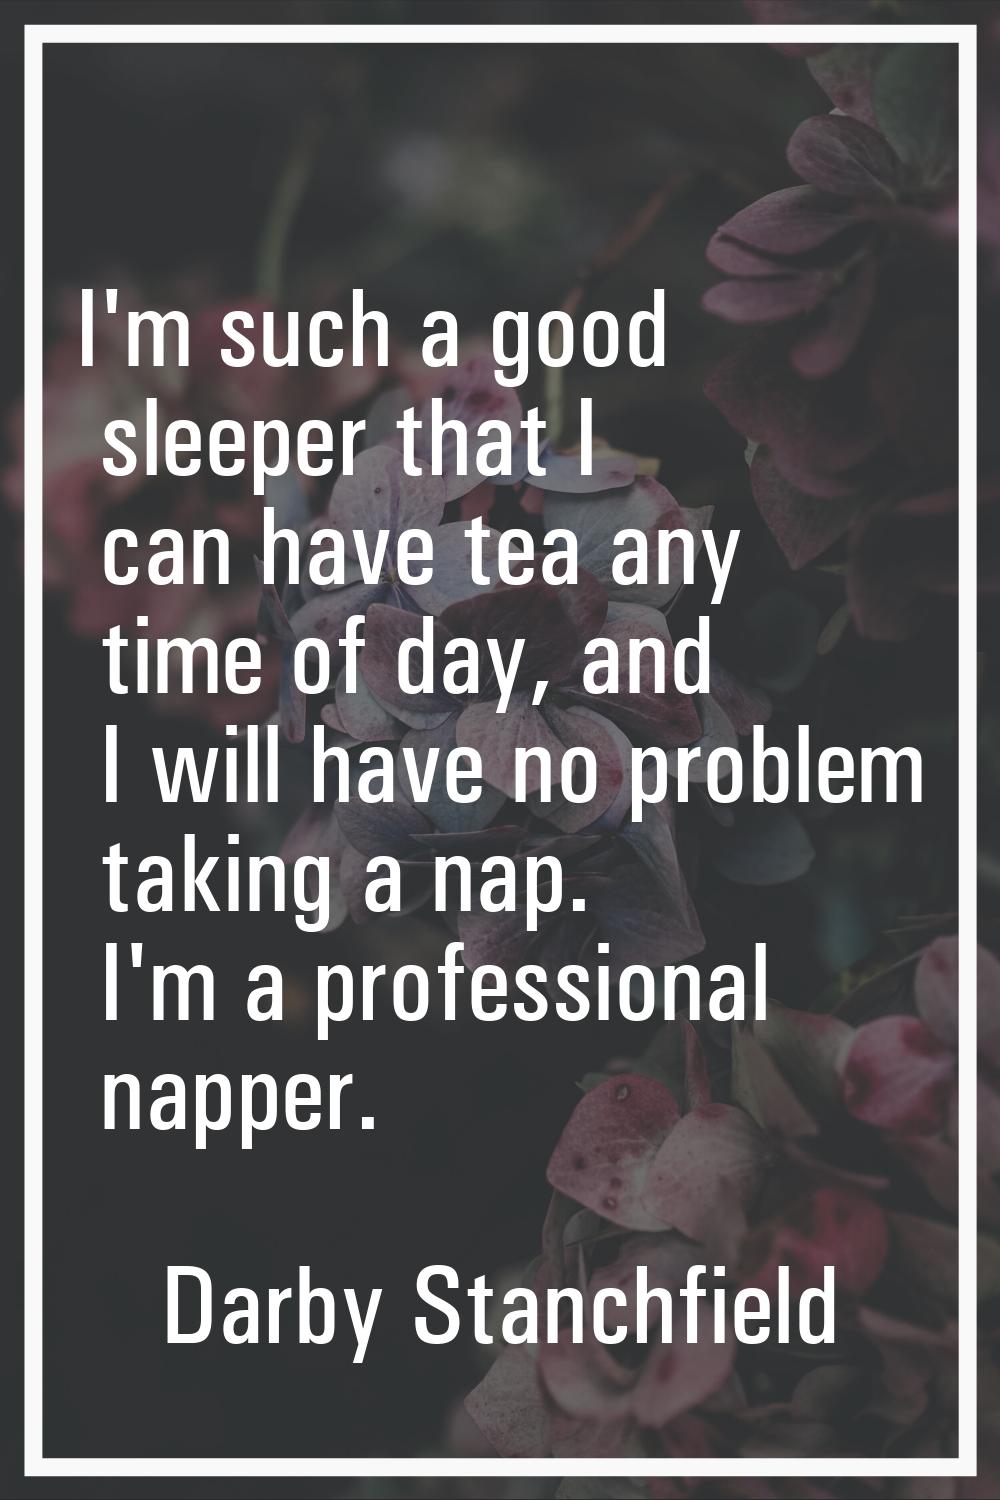 I'm such a good sleeper that I can have tea any time of day, and I will have no problem taking a na